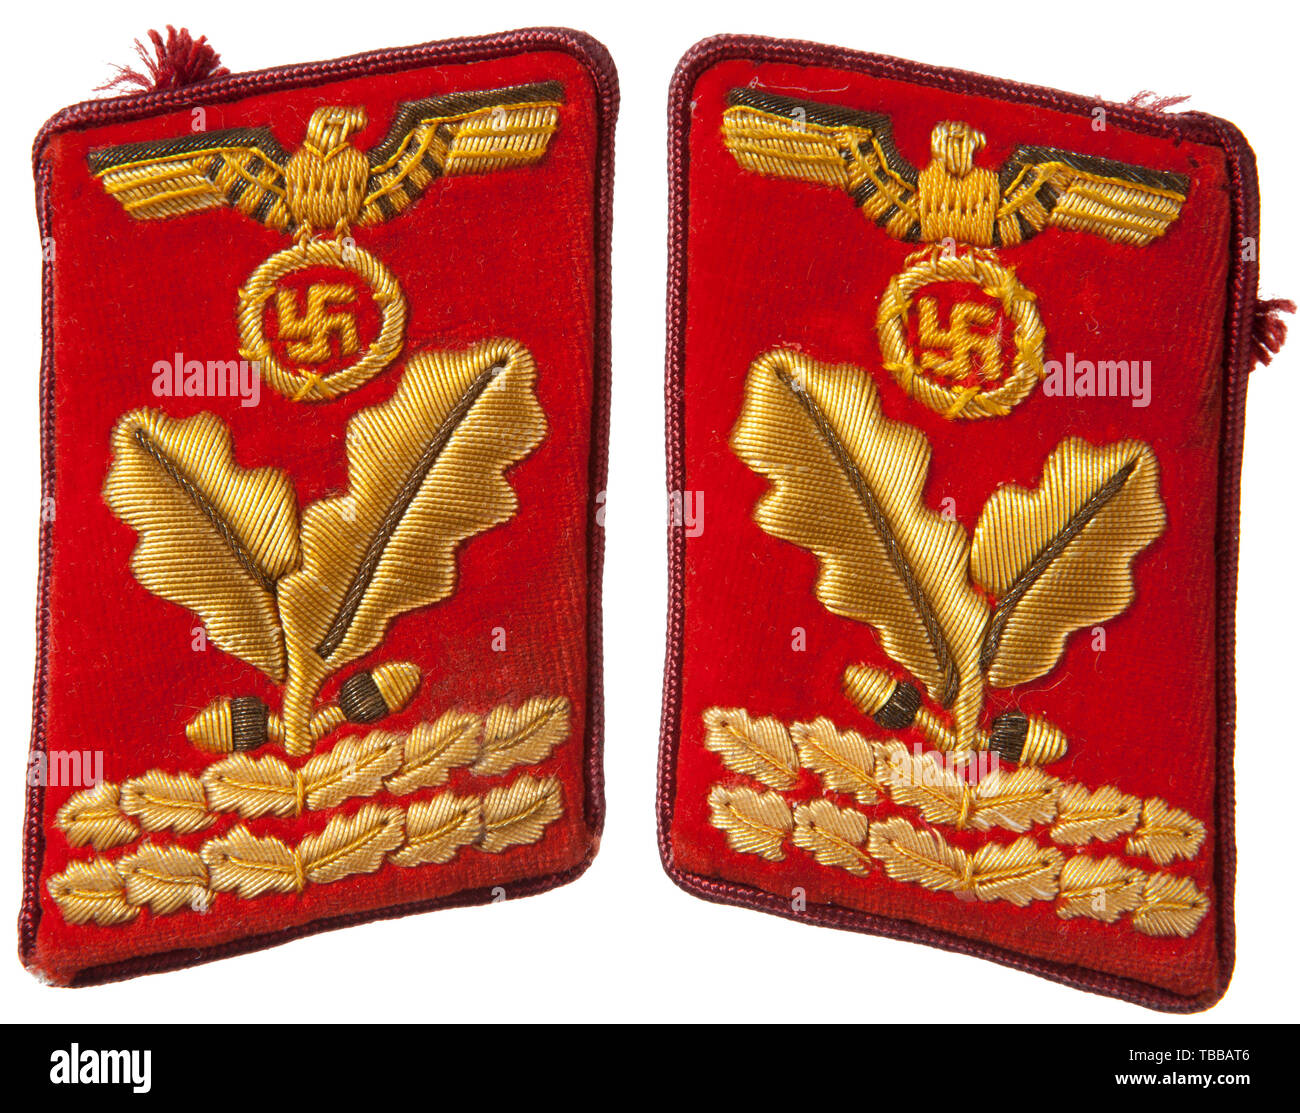 THE JOHN PEPERA COLLECTION, A Pair of Collar Tabs for NSDAP Gauleitung Hauptbereichsleiter, Red velvet on buckram backing, outer edges trimmed in dark red rayon piping with paper RZM tag. Tabs feature cellon embroidered national eagle above two oak leaves above two horizontal oak leaf bars in matching construction all with gold wire thread highlights., Editorial-Use-Only Stock Photo